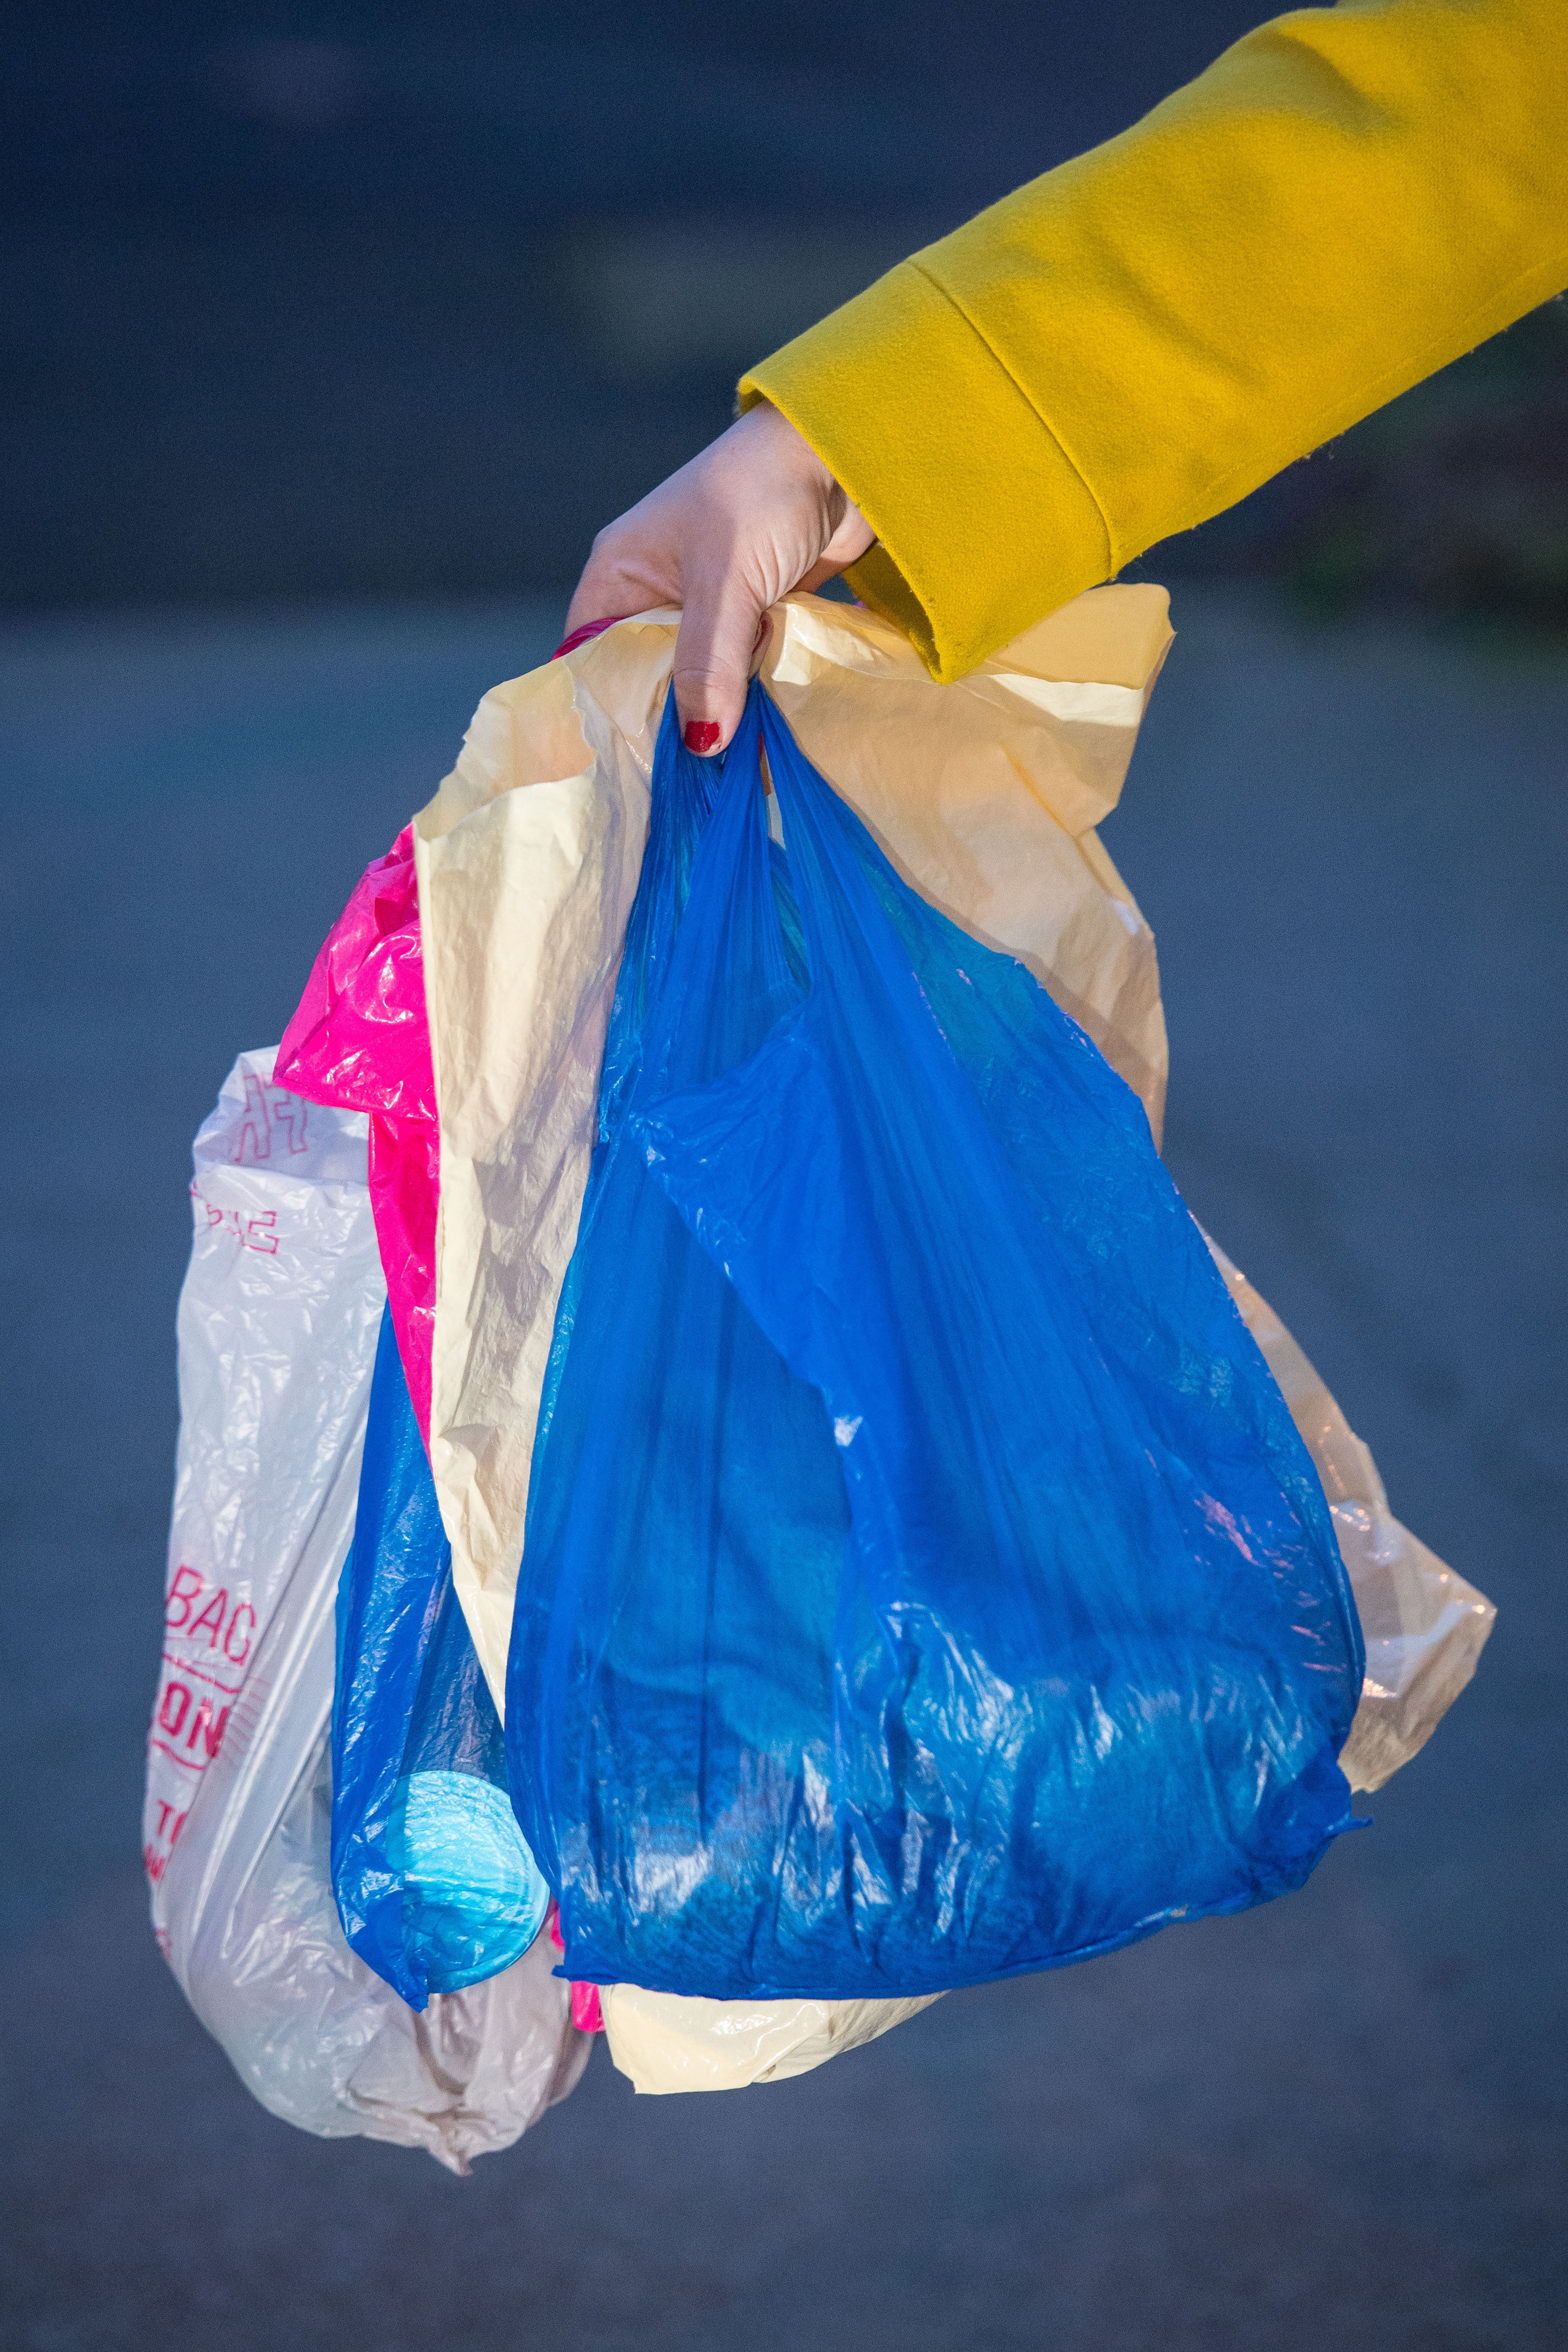 England’s single-use plastic bag charge rose to 10p in May this year (Dominic Lipinski/PA)